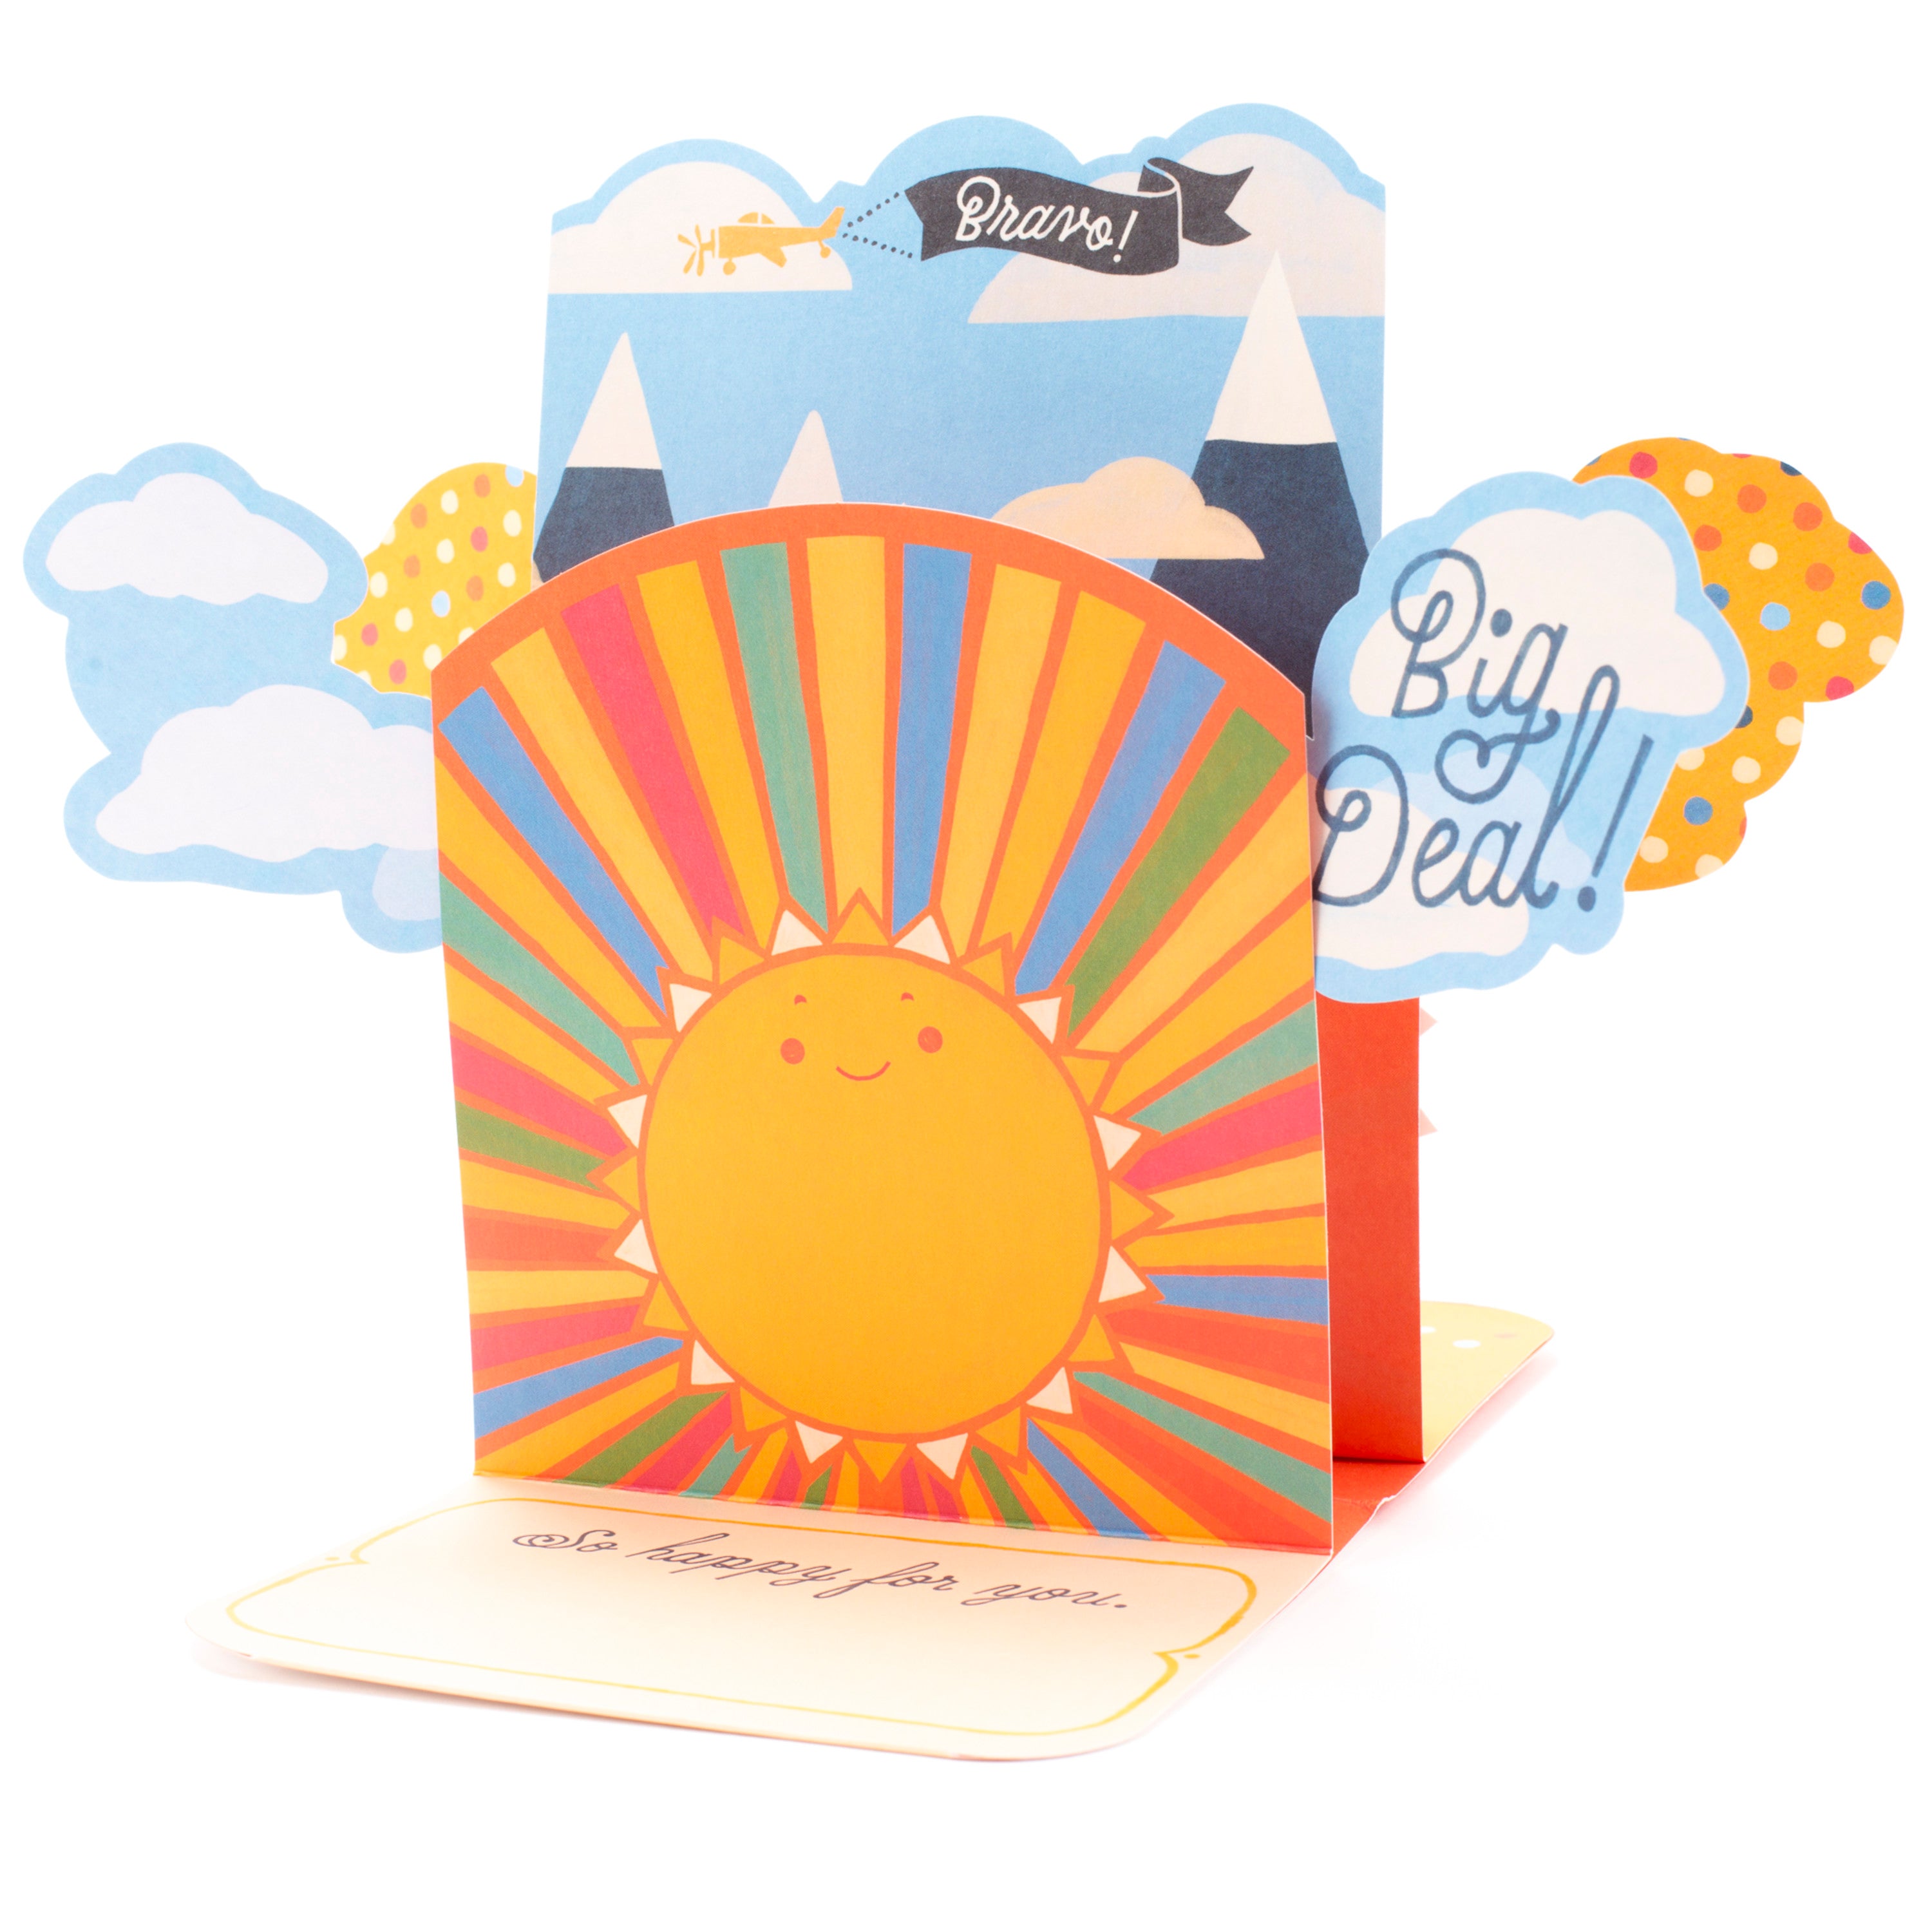 Pop Up Graduation Card with Song (Smiling Sun, Plays Happy by Pharrell Williams )